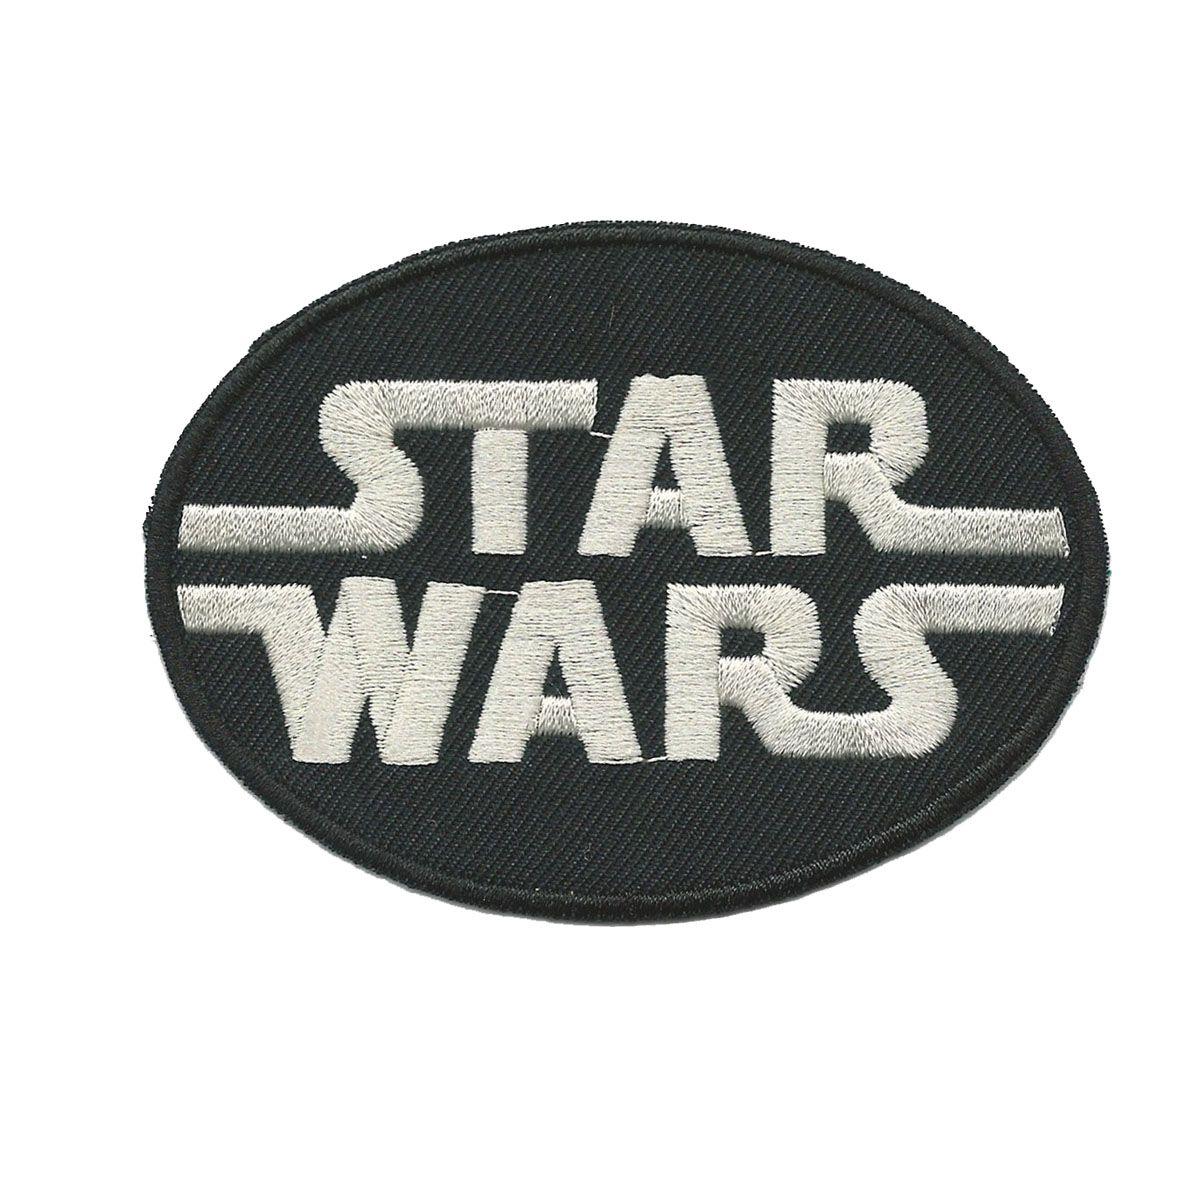 Star in Oval Logo - Star Wars Oval Logo Iron on Patch Applique